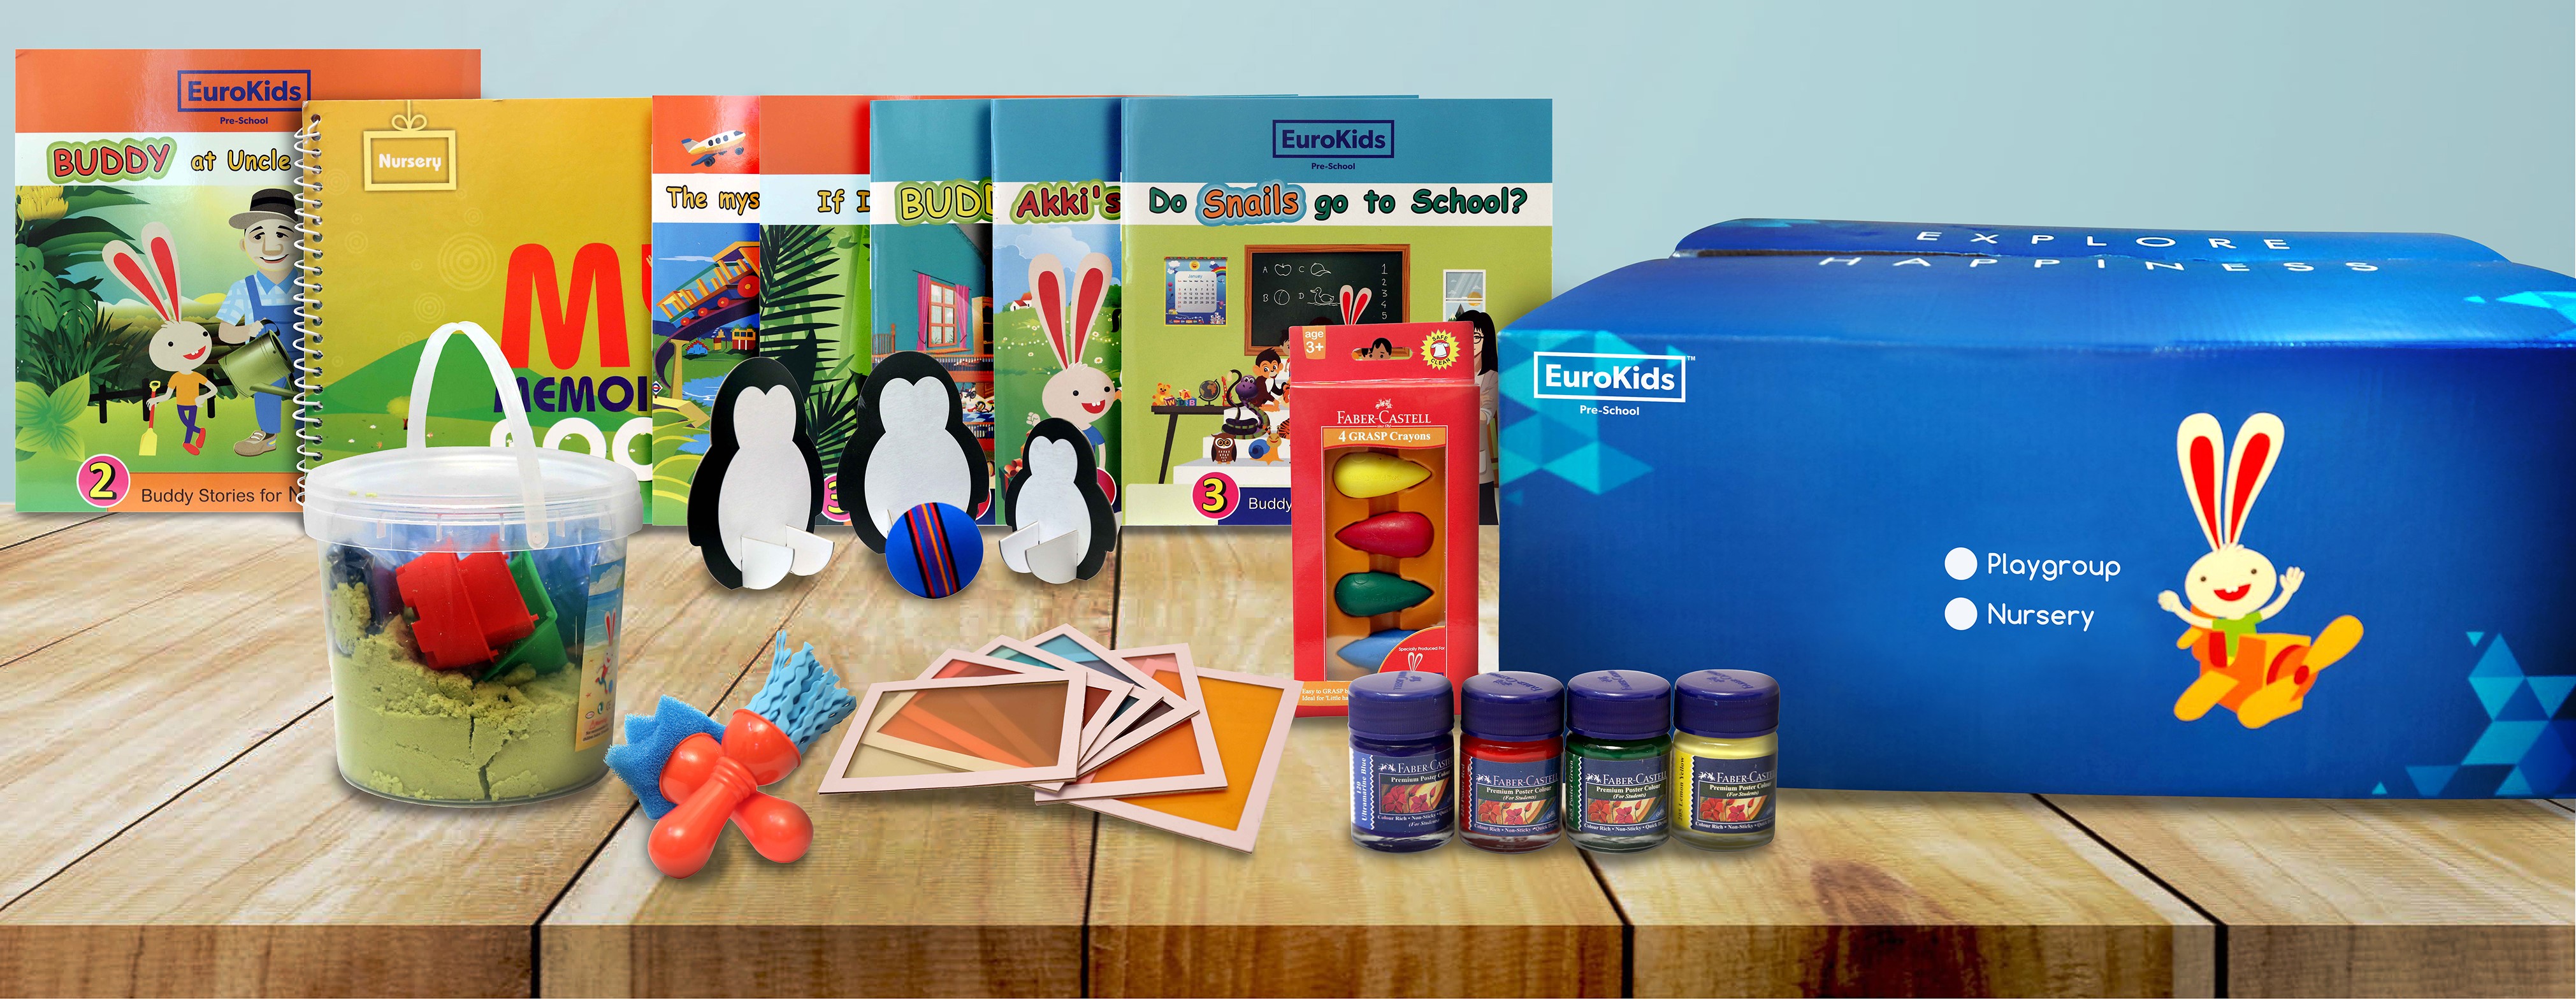 EuroKids International launches an offline Home Schooling Kit to ensure continued learning